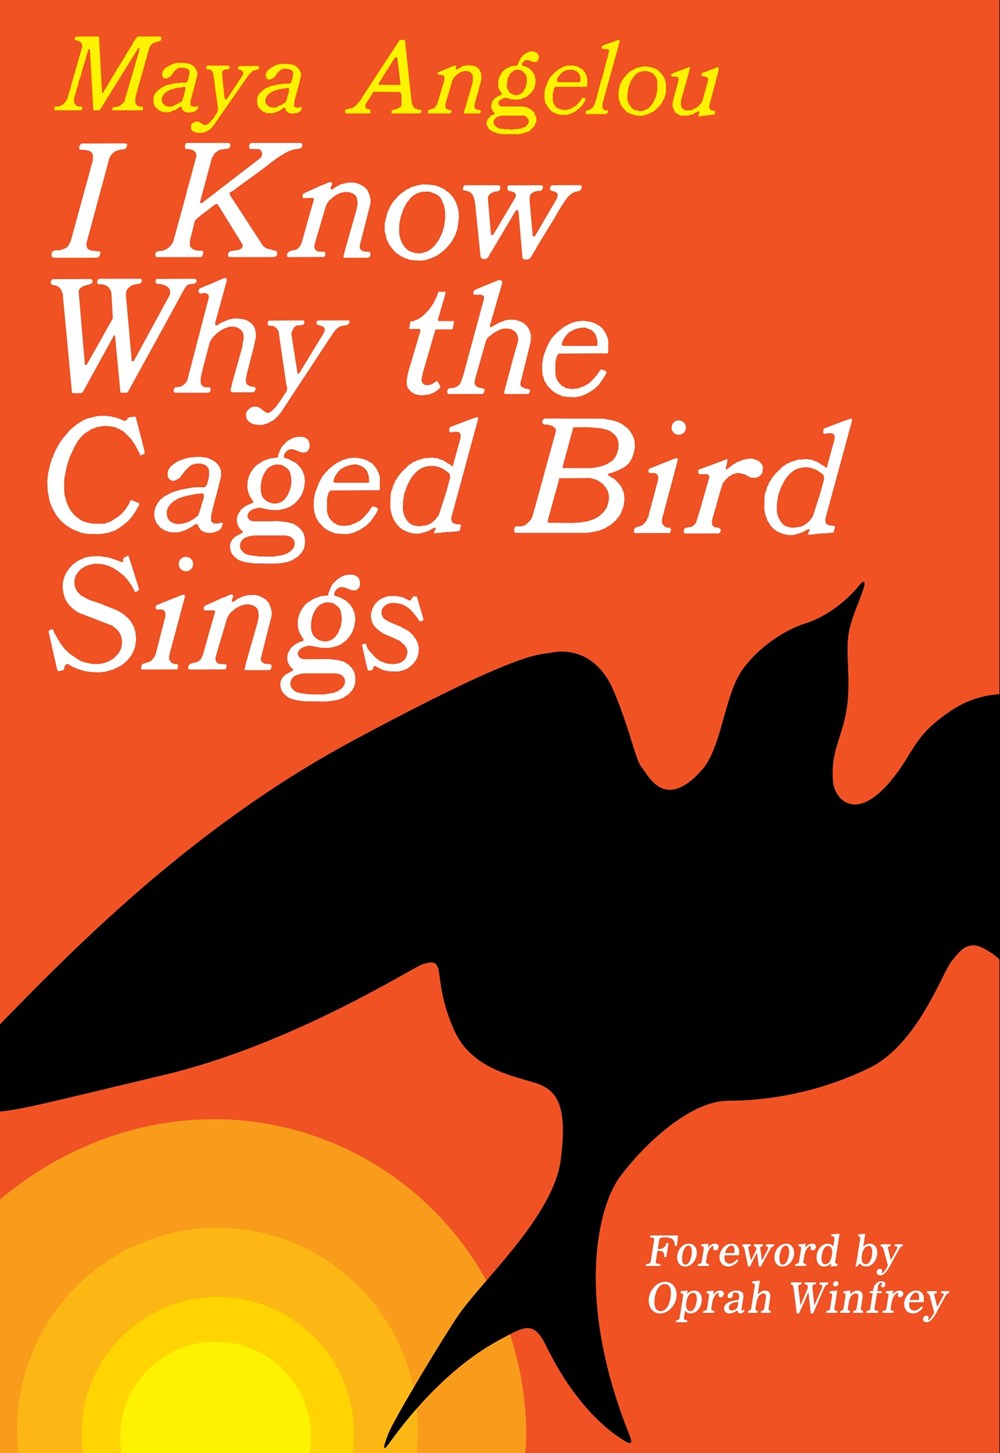 I Know Why the Caged Bird Sings by Maya Angelou (Foreword by Oprah Winfrey)